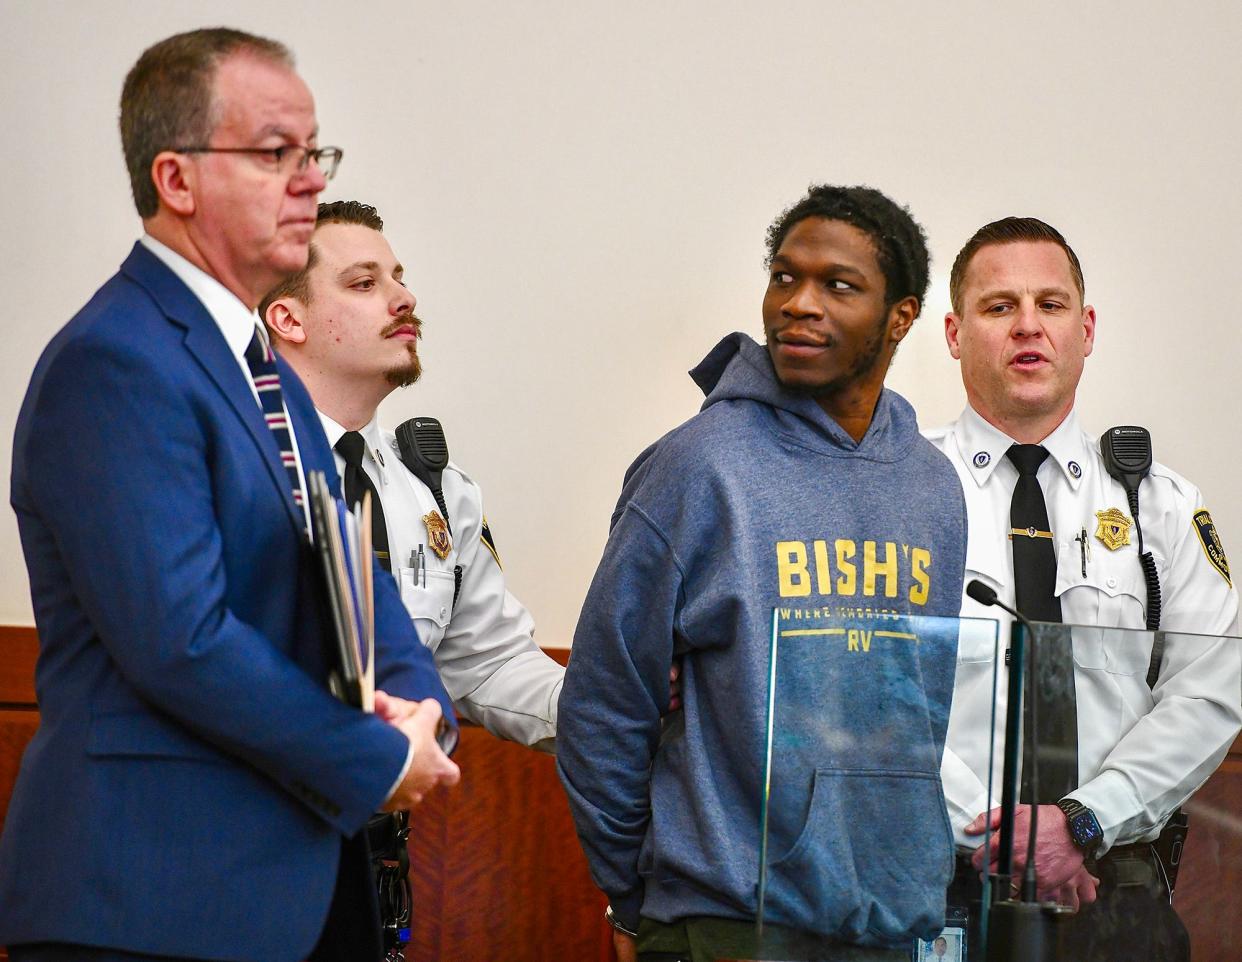 Dejan Belnavis is arraigned on murder charges in Central District Court Friday. He is wearing a sweatshirt with the name Bish's, a chain of RV dealerships.